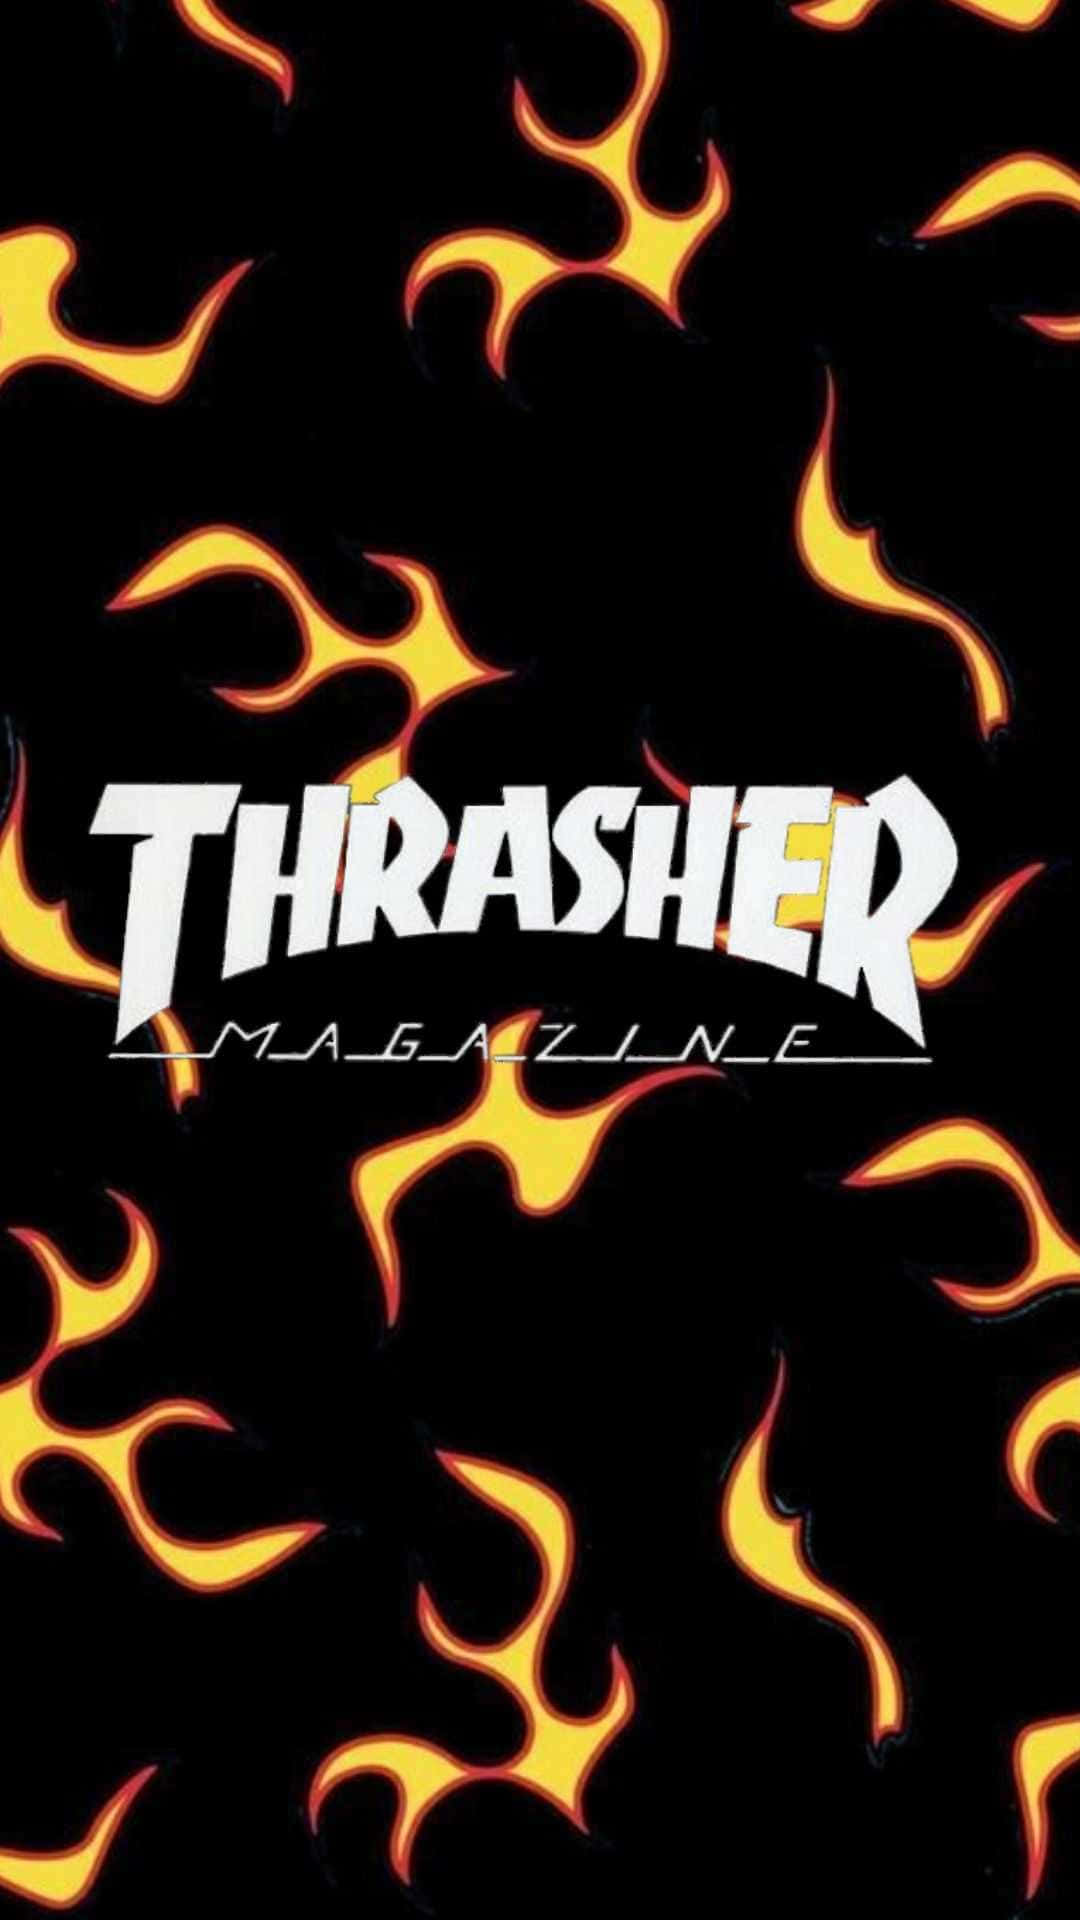 Throw on your Thrasher t-shirt and show your true colors